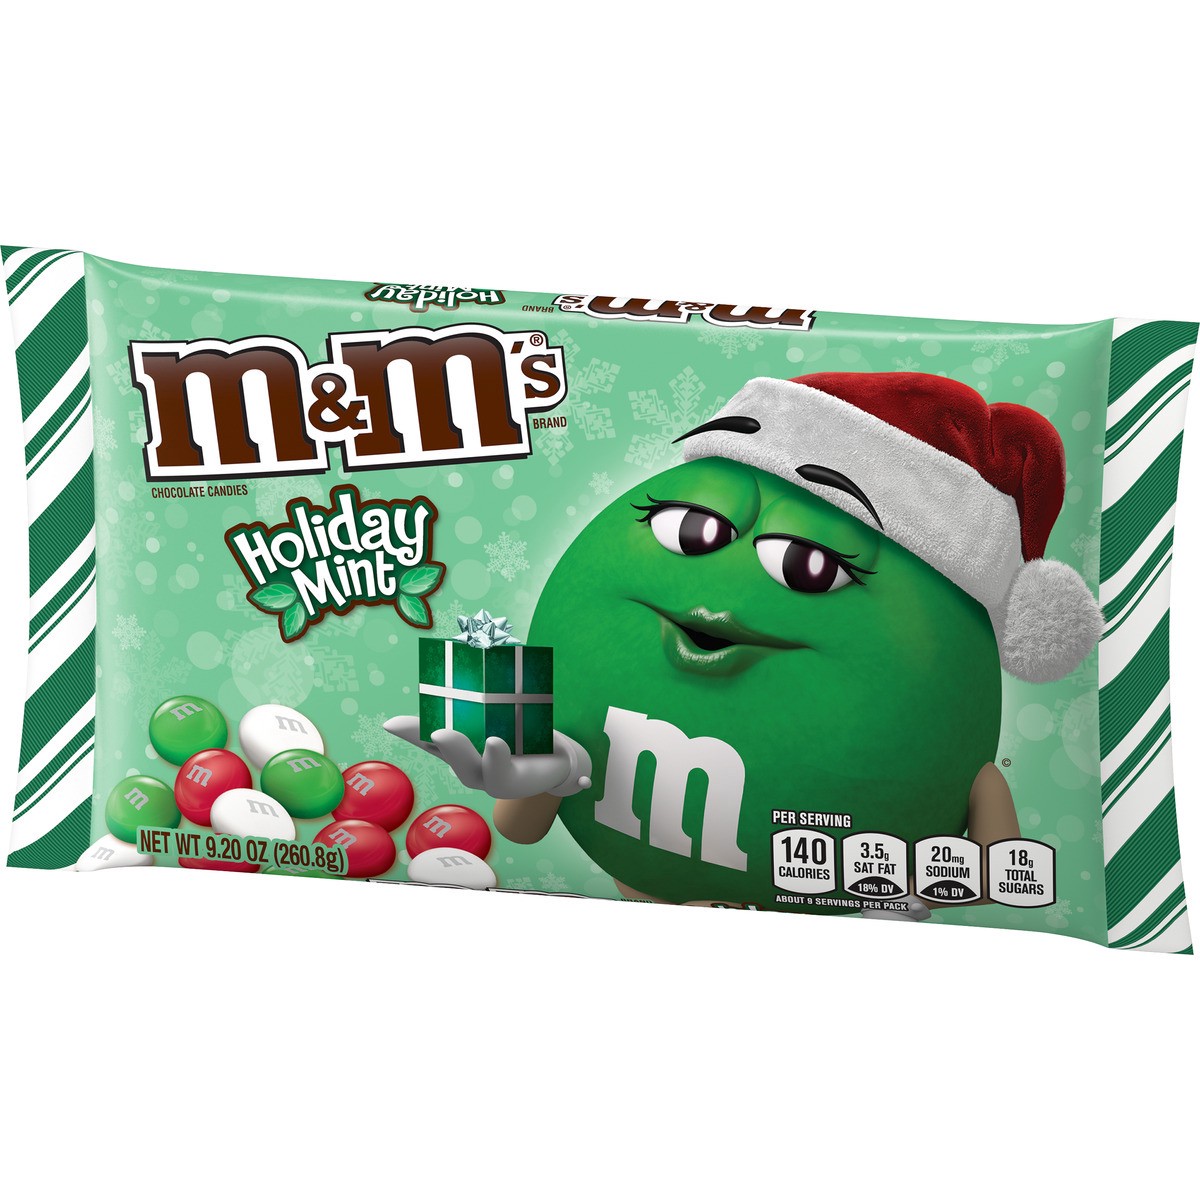 slide 13 of 13, M&M's Holiday Mint Chocolate Candies - 9.2oz, 9.2 oz